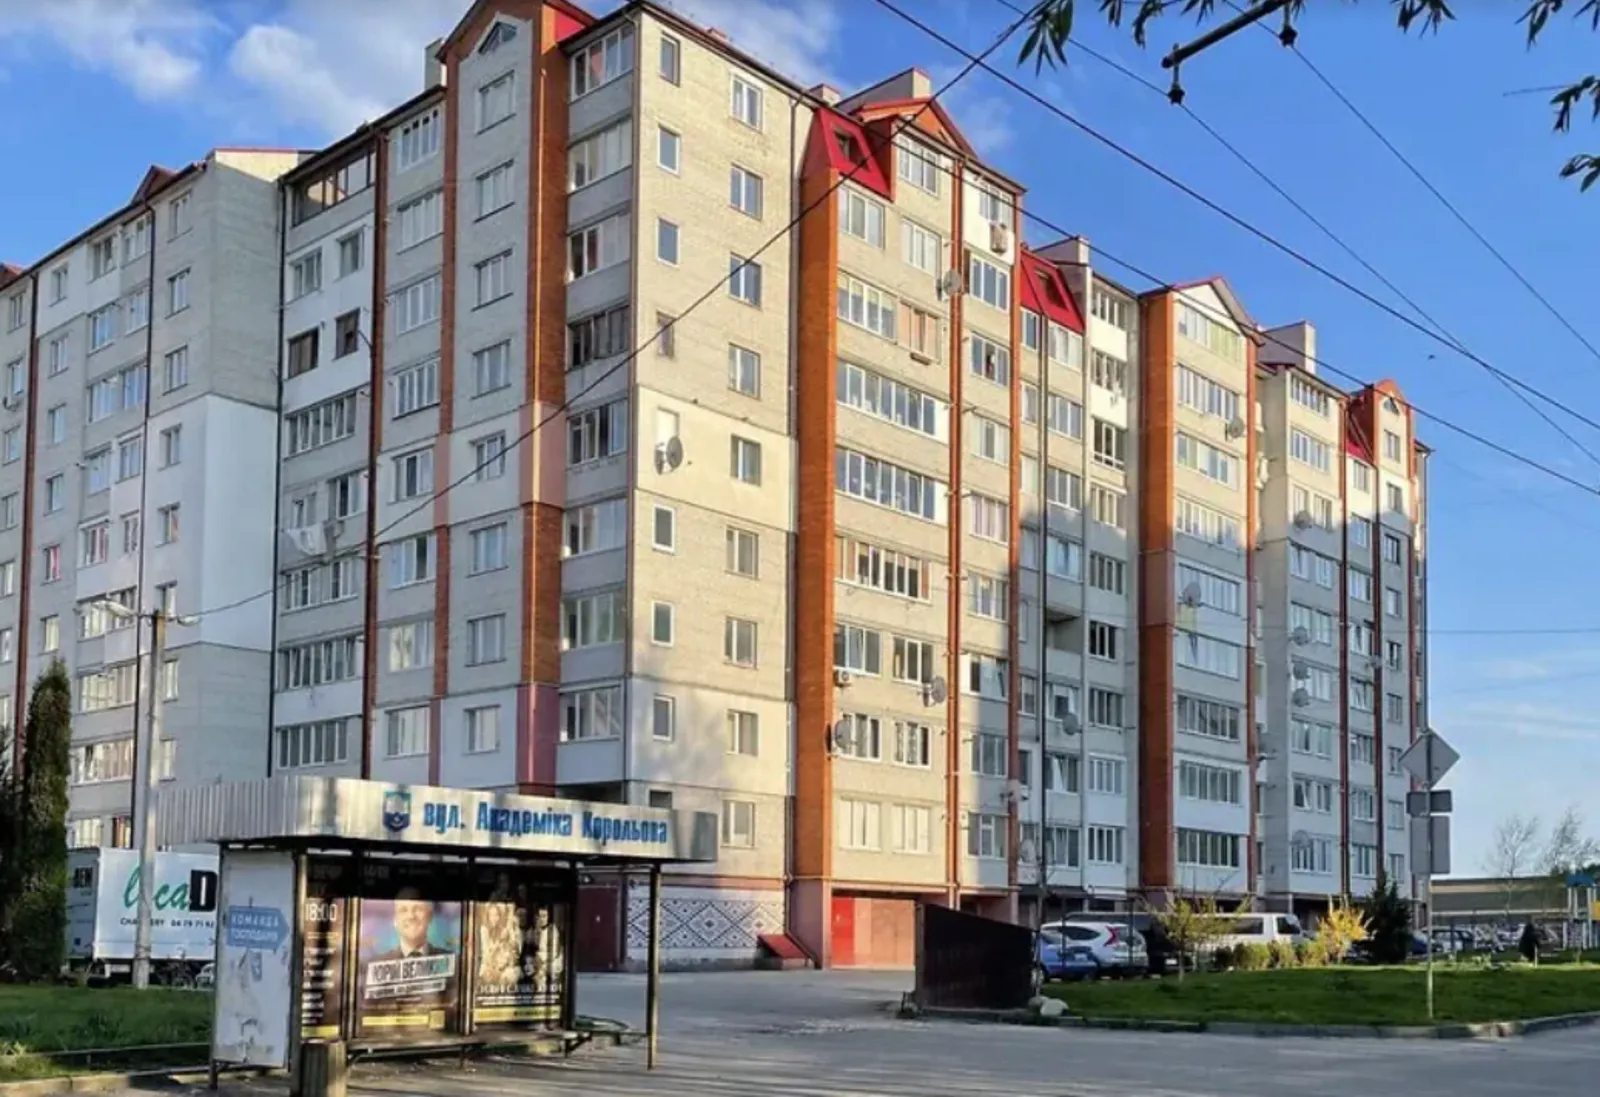 Apartments for sale. 3 rooms, 80 m², 1st floor/9 floors. Bam, Ternopil. 